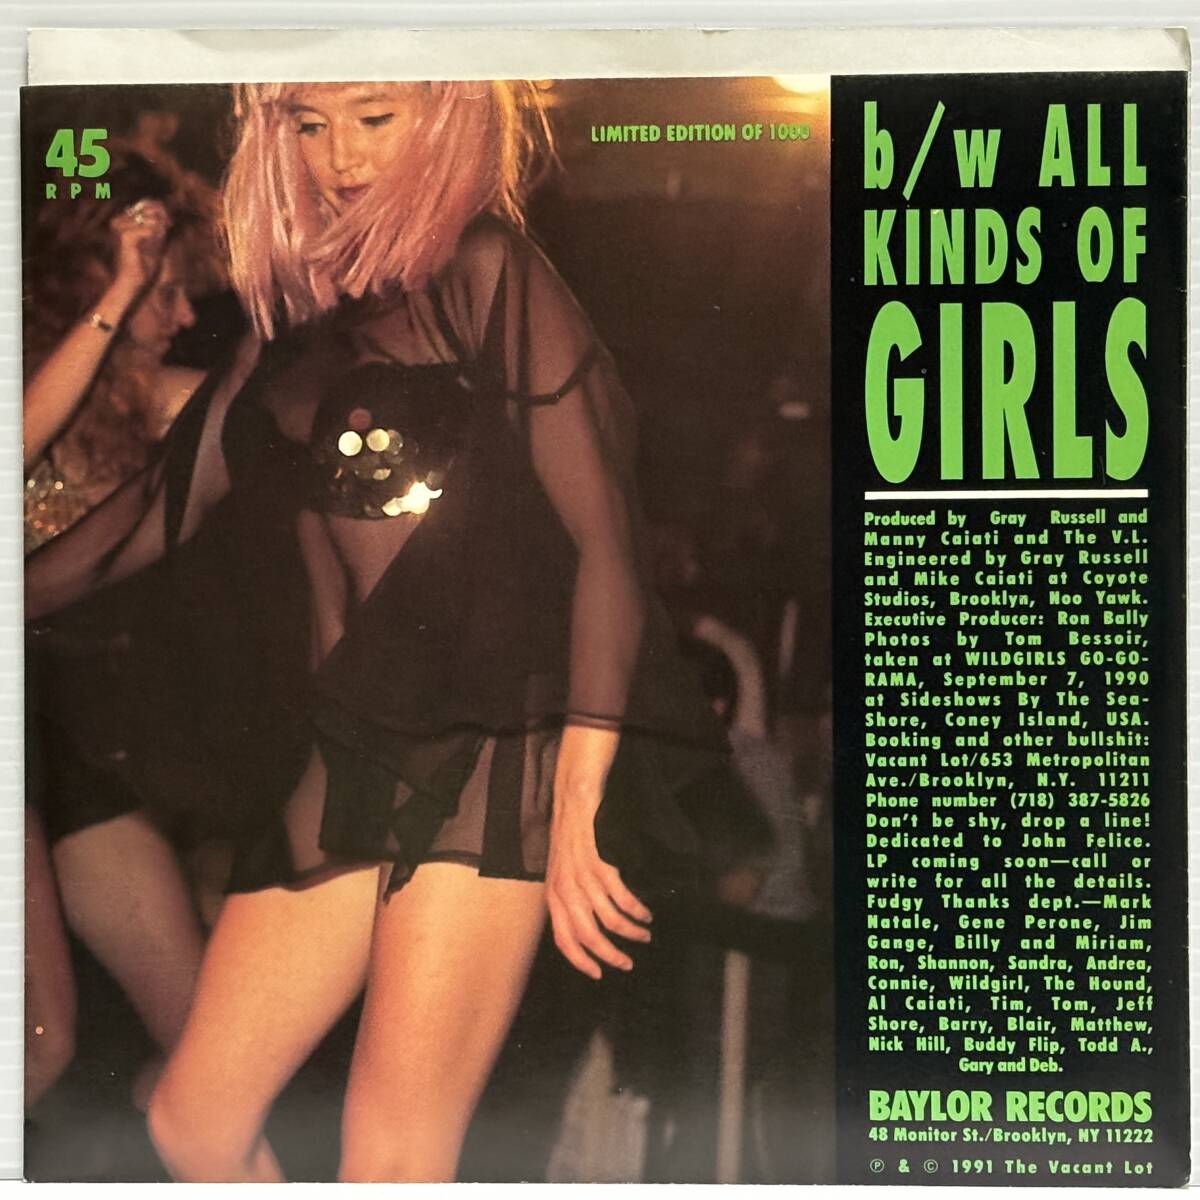 Vacant Lot / She Gotta Leave : All Kinds Of Girls (The Real Kidsカバー) (7 inch Clear Green Vinyl) ■Used■_画像2